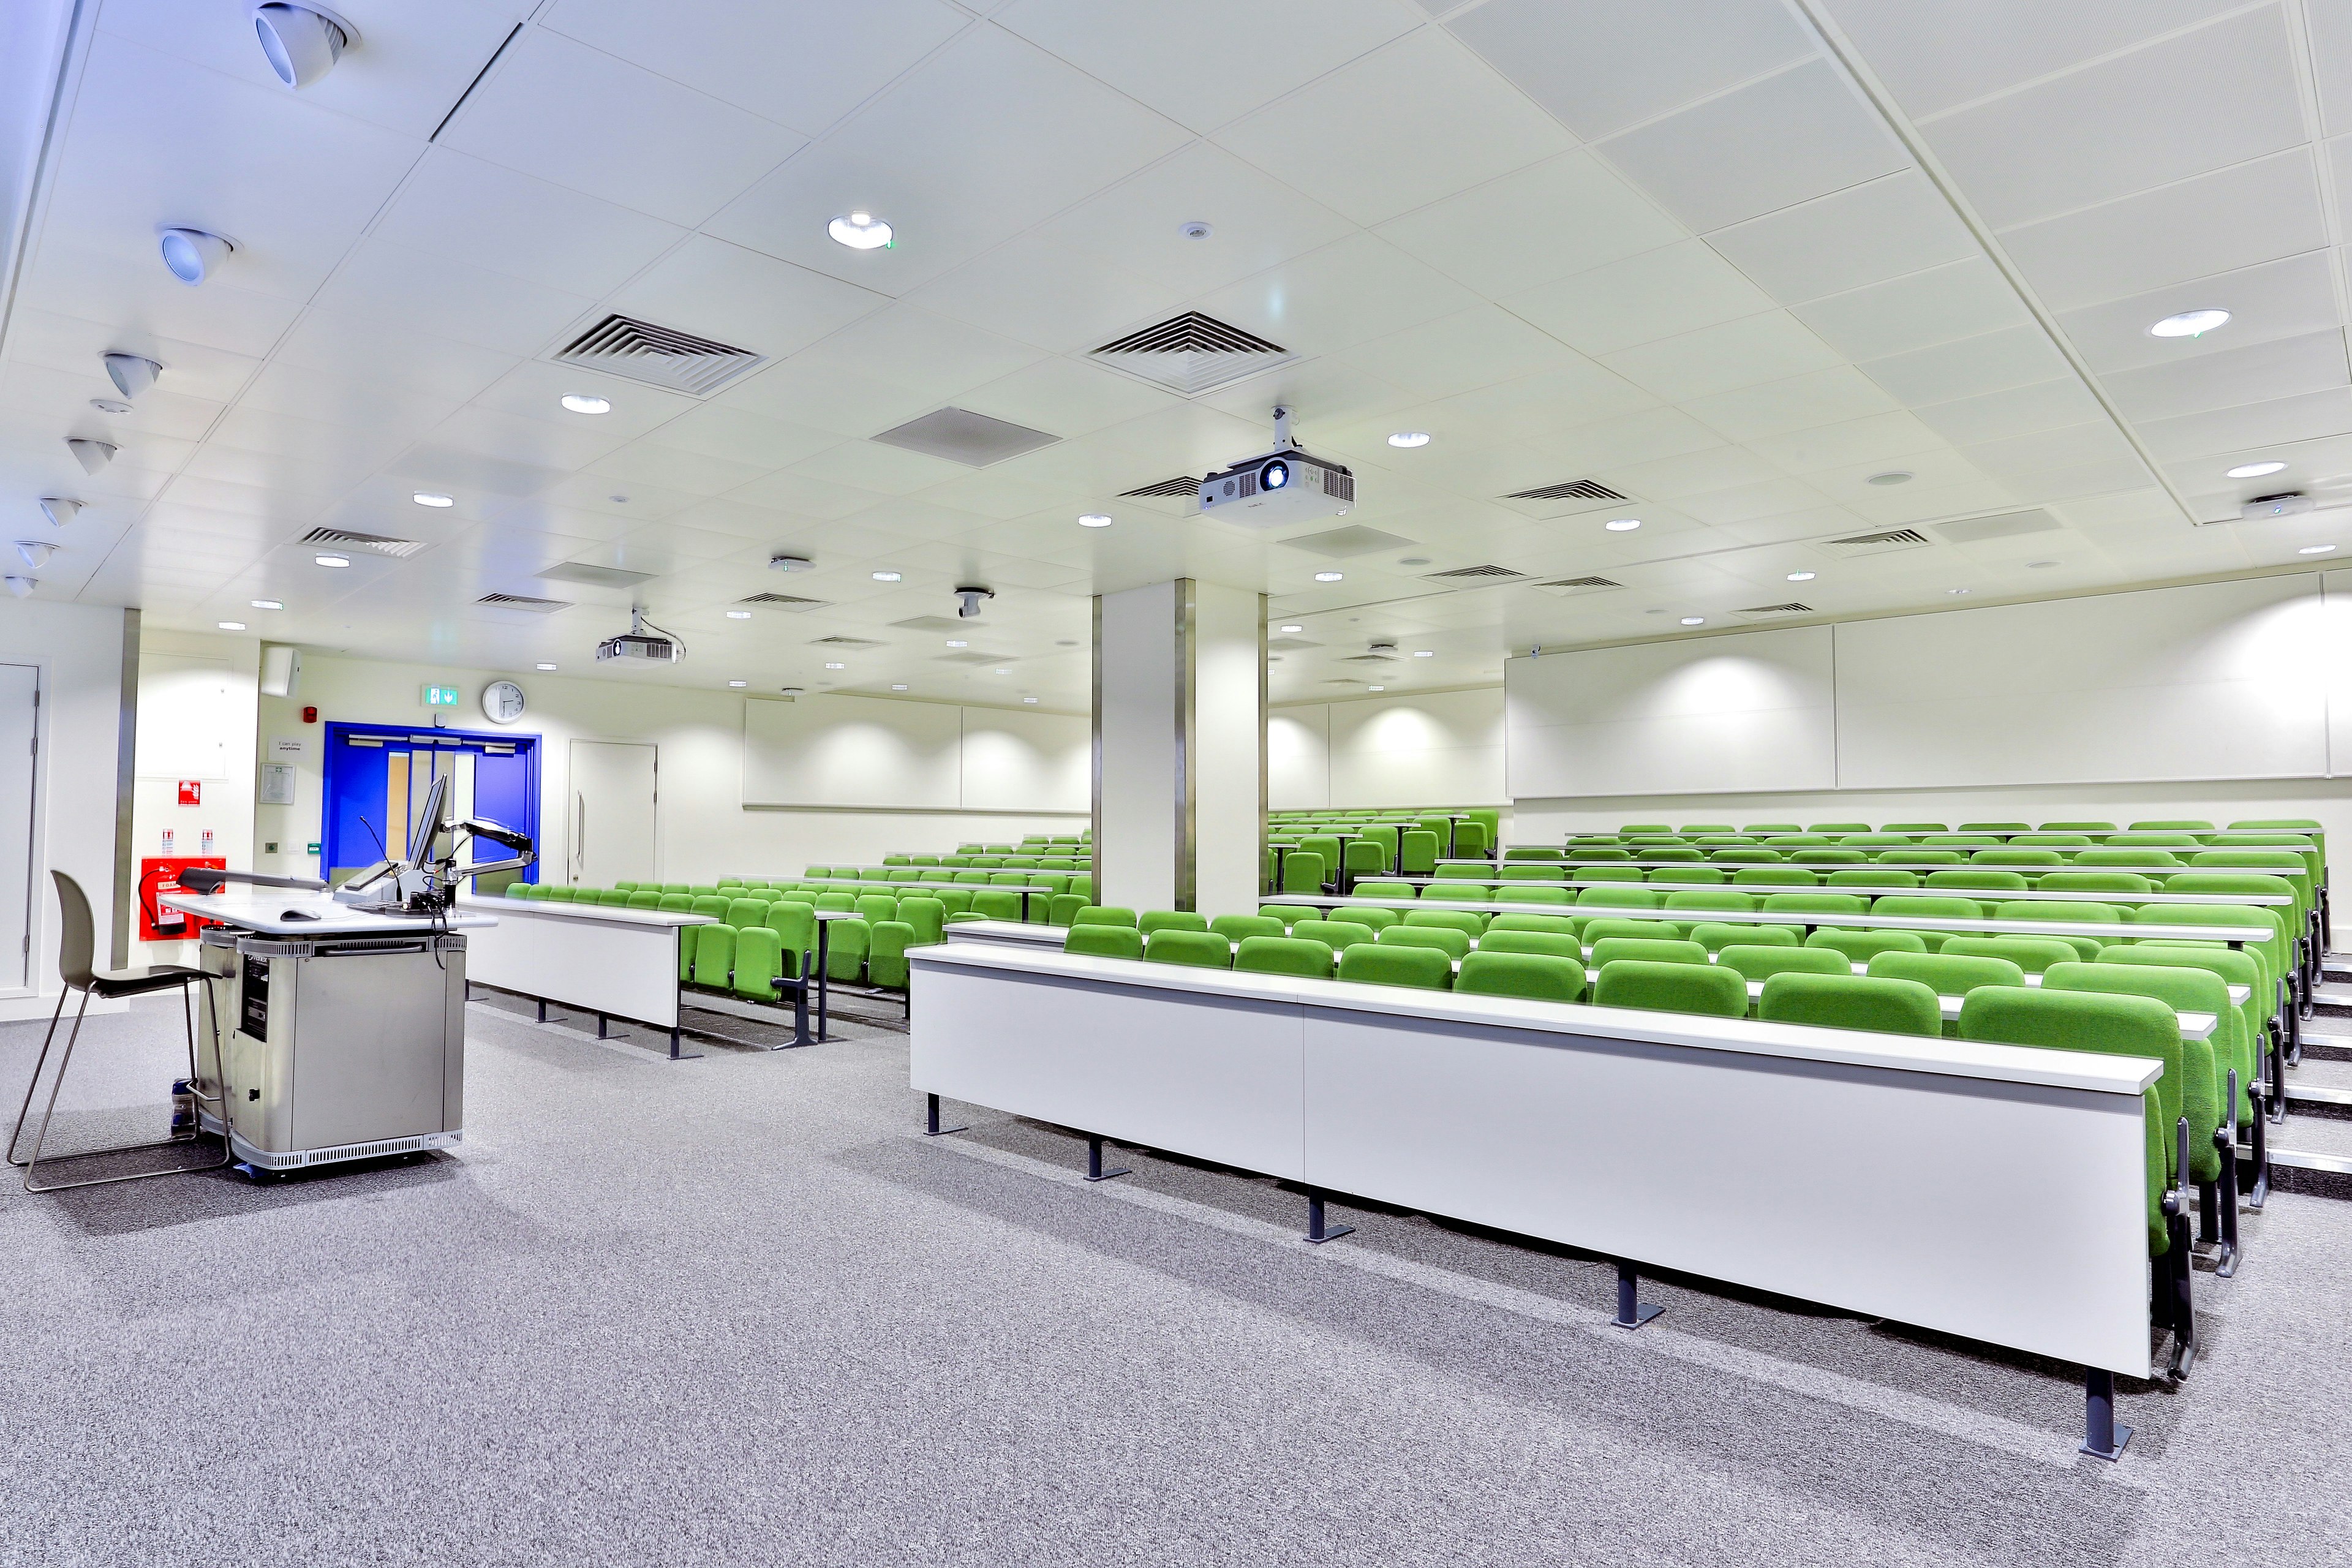 Imperial Venues - Imperial College South Kensington - Classrooms and Lecture Theatres image 5